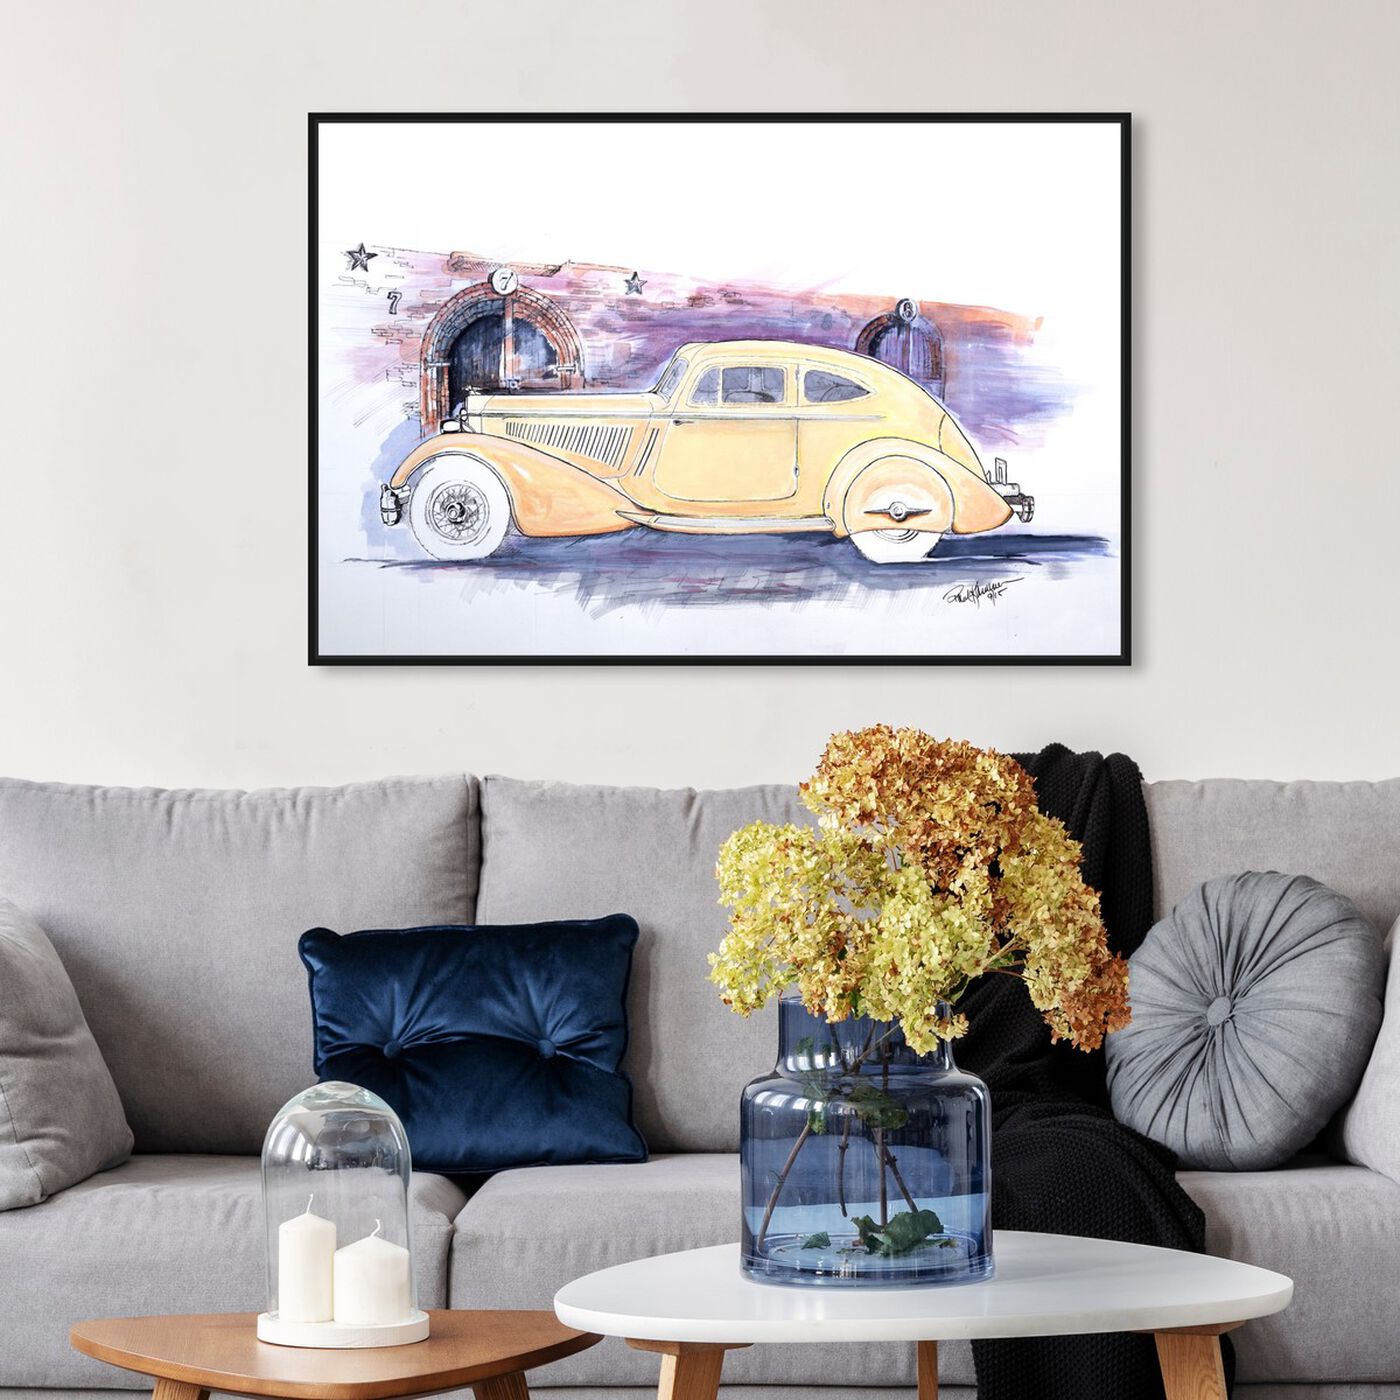 Hanging view of Paul Kaminer - 1934 Packard V-12 Sport Coupe featuring transportation and automobiles art.